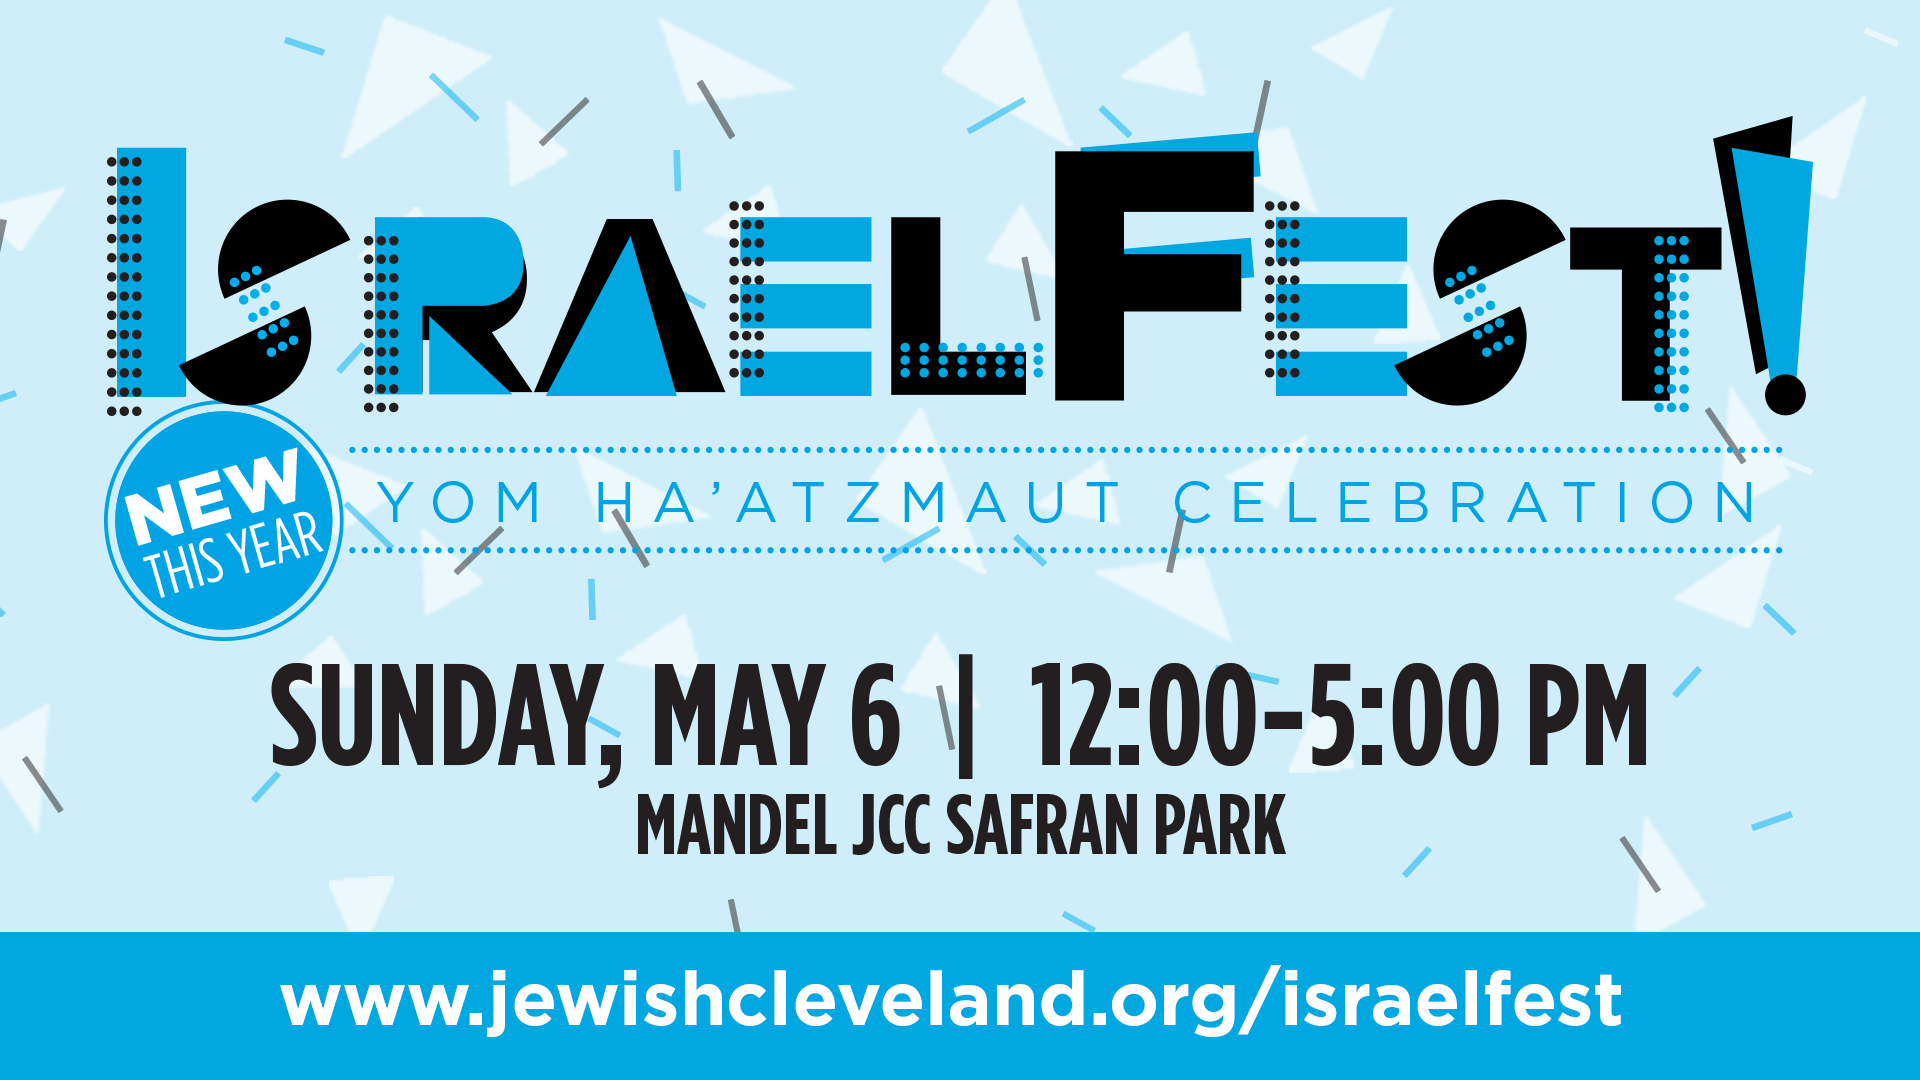 Celebrate at IsraelFest! on May 6!